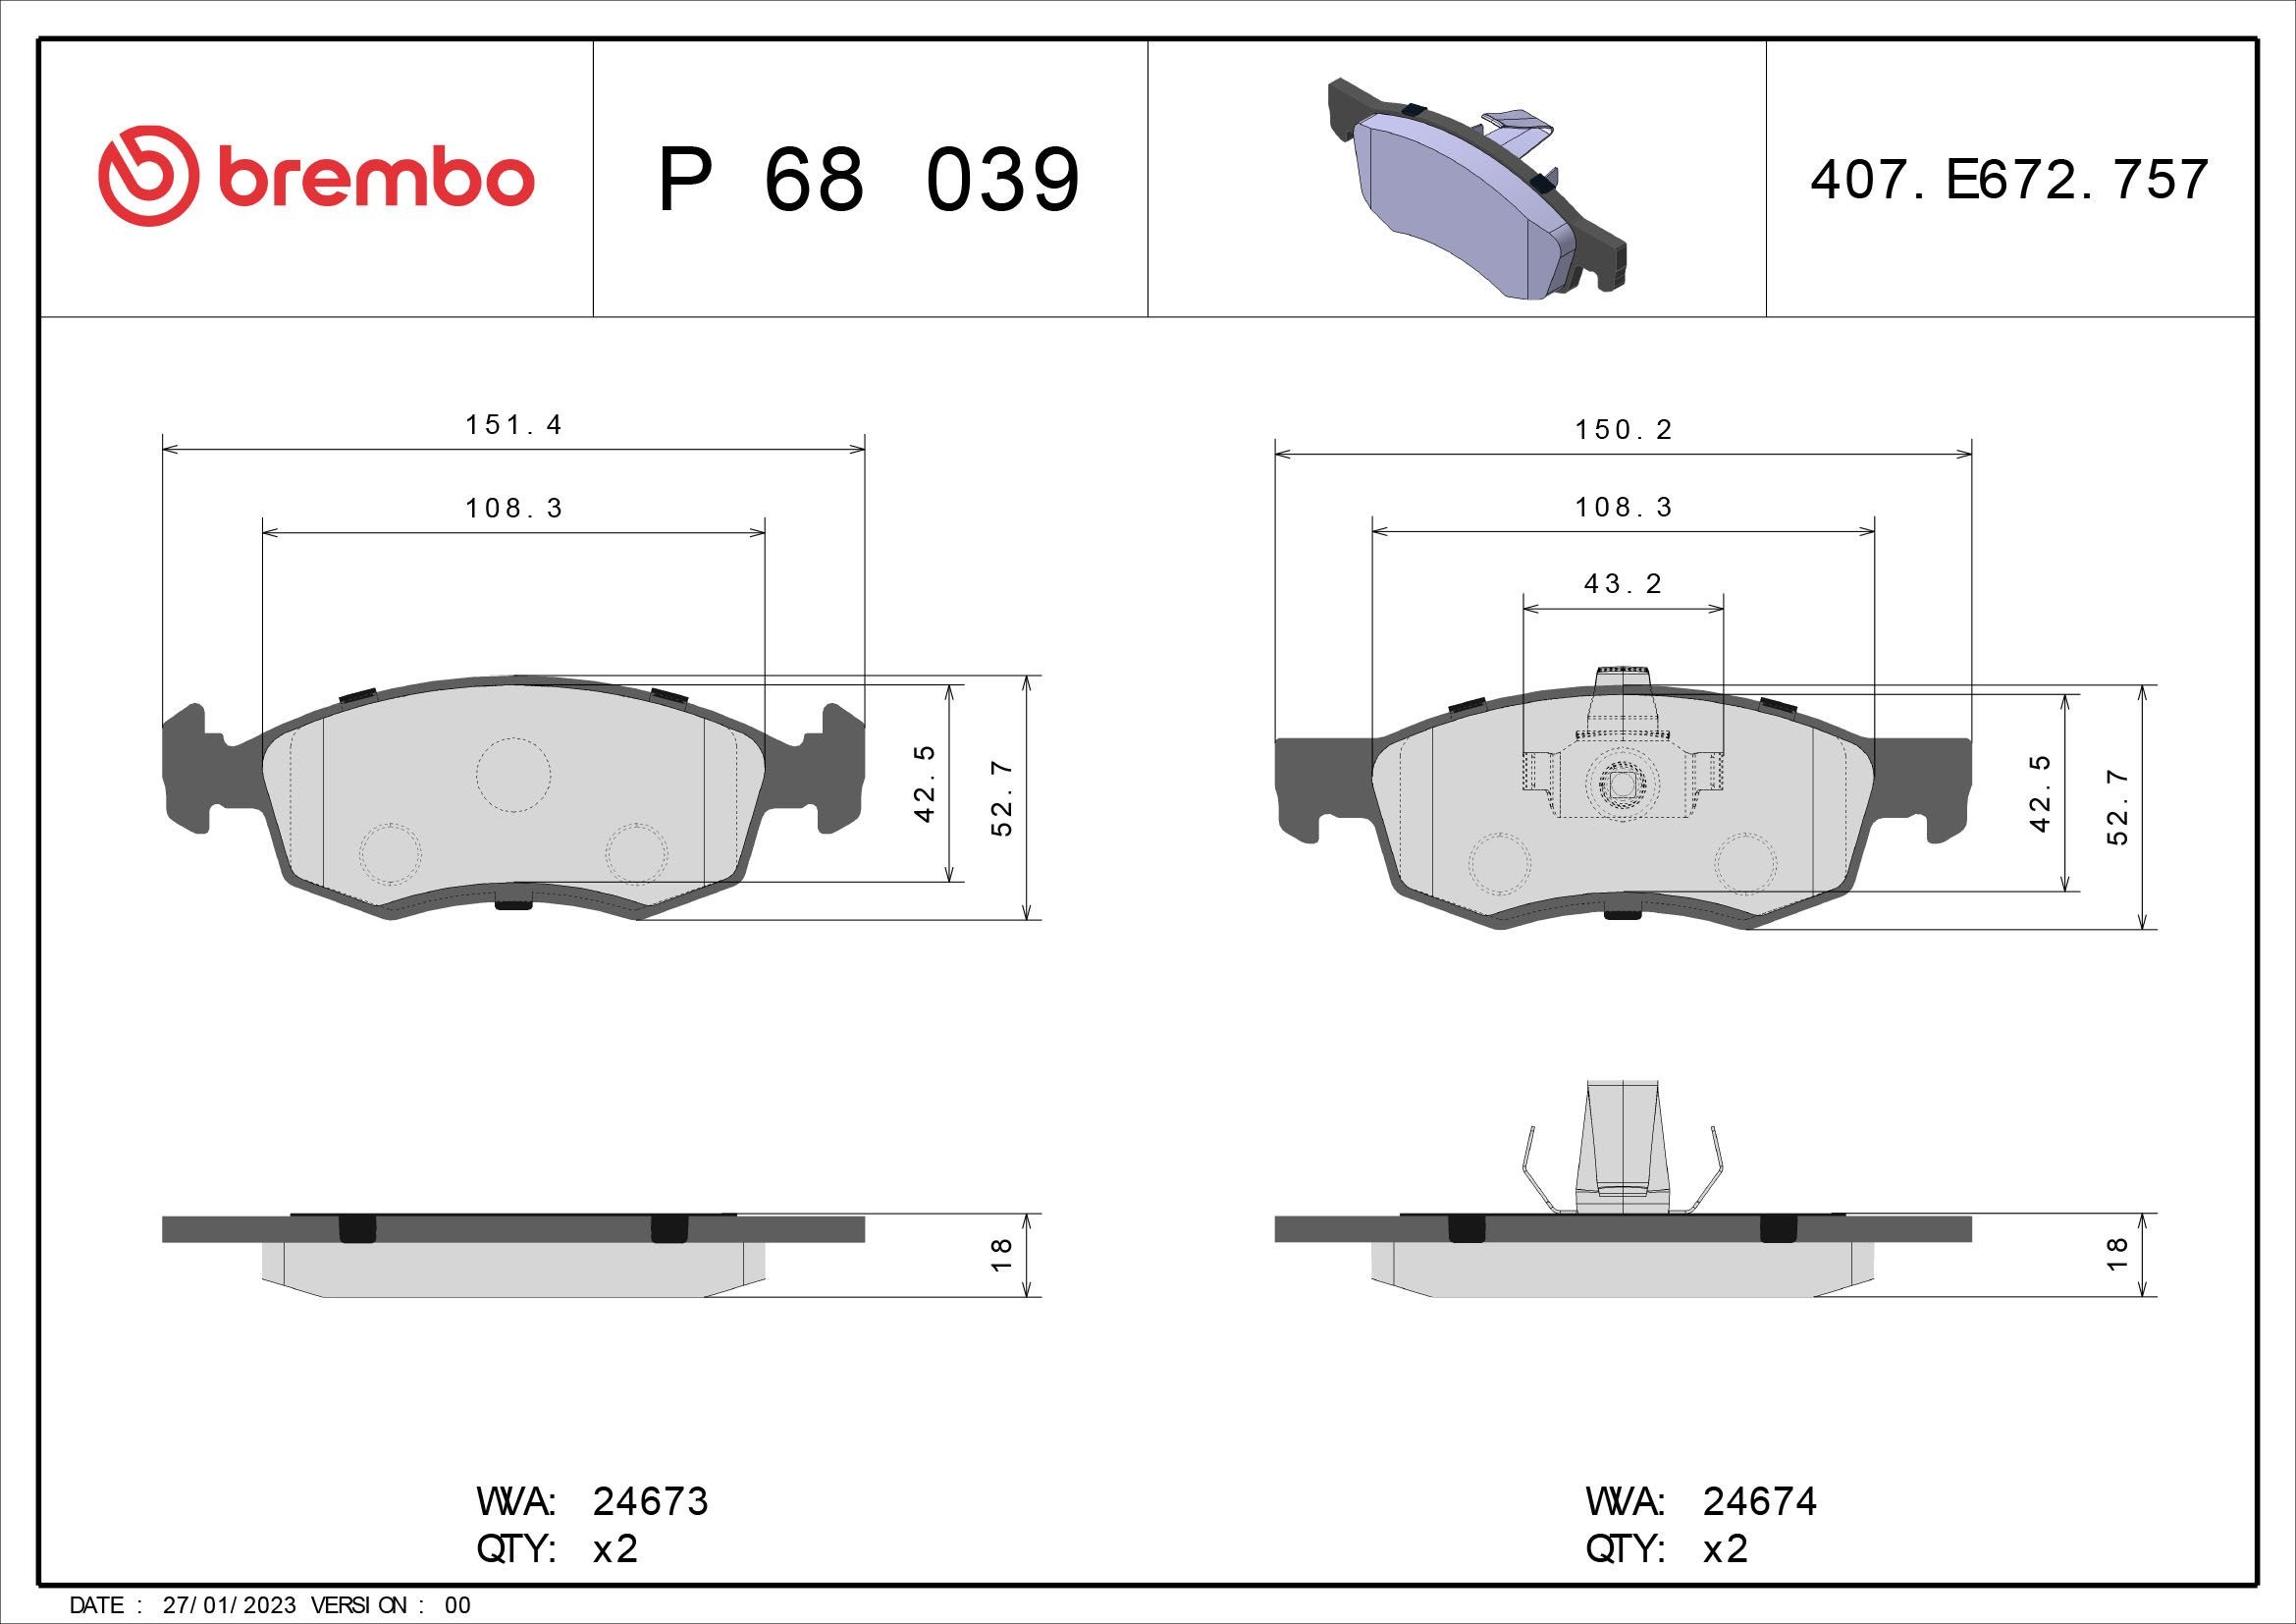 BREMBO P 68 039 Brake pad set excl. wear warning contact, without accessories